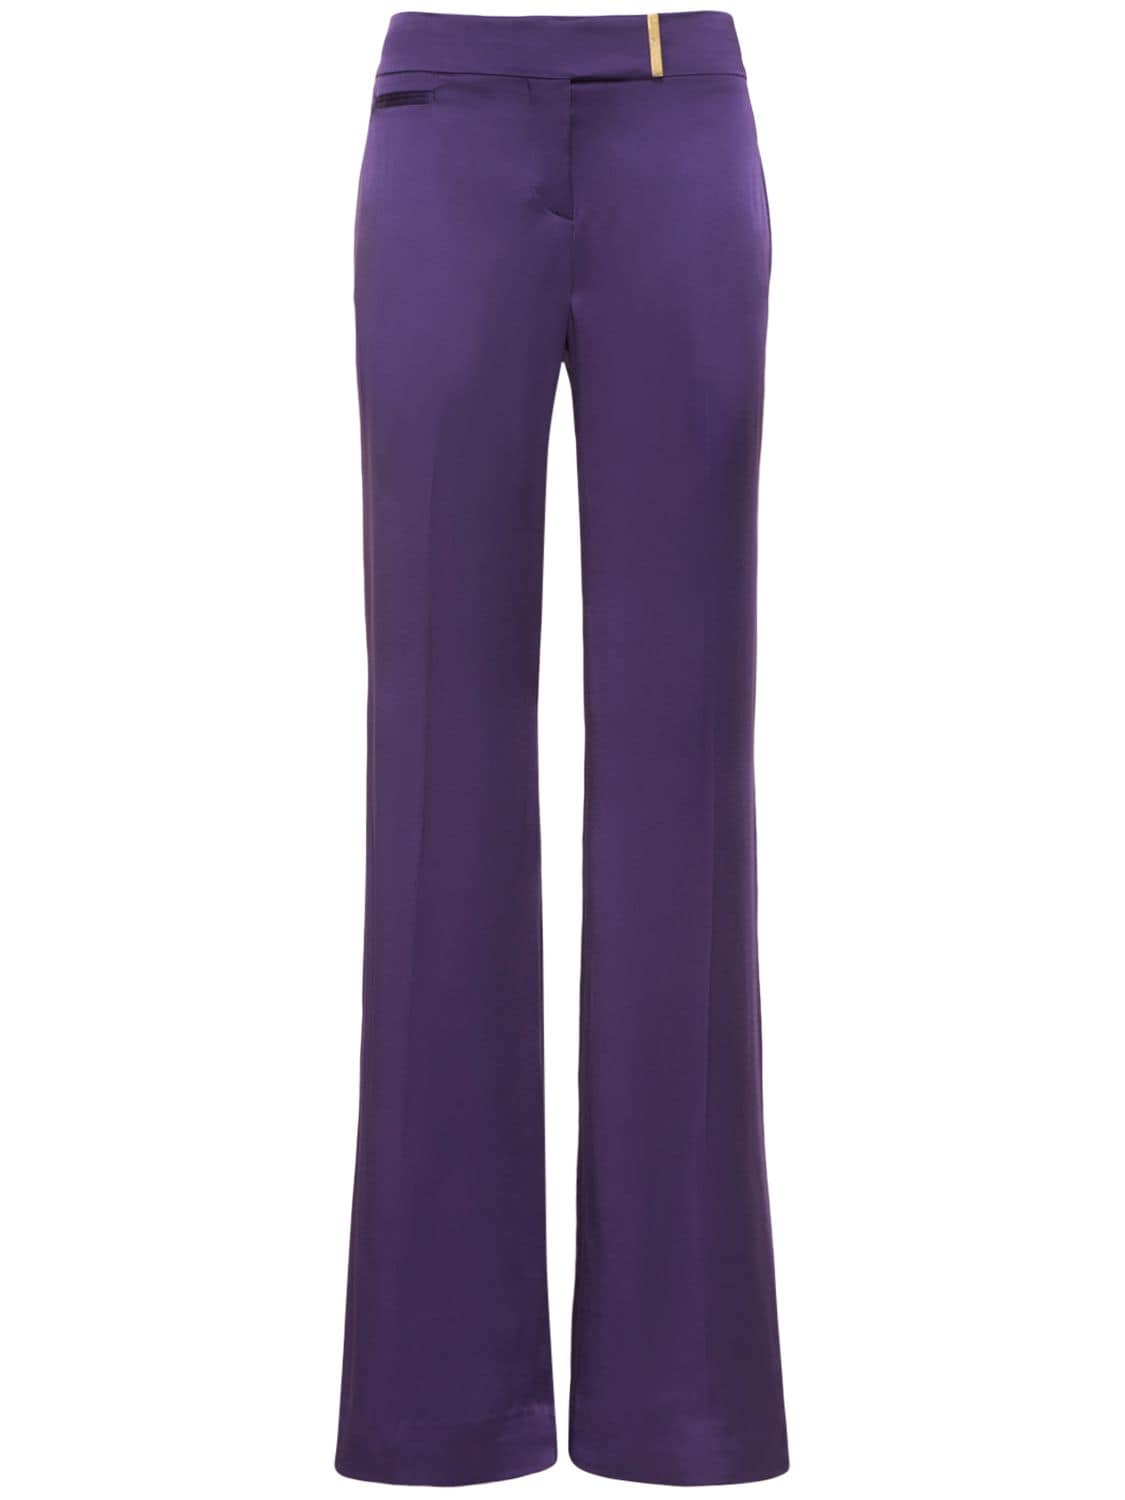 TOM FORD MID RISE WIDE FLUID SATIN PANTS